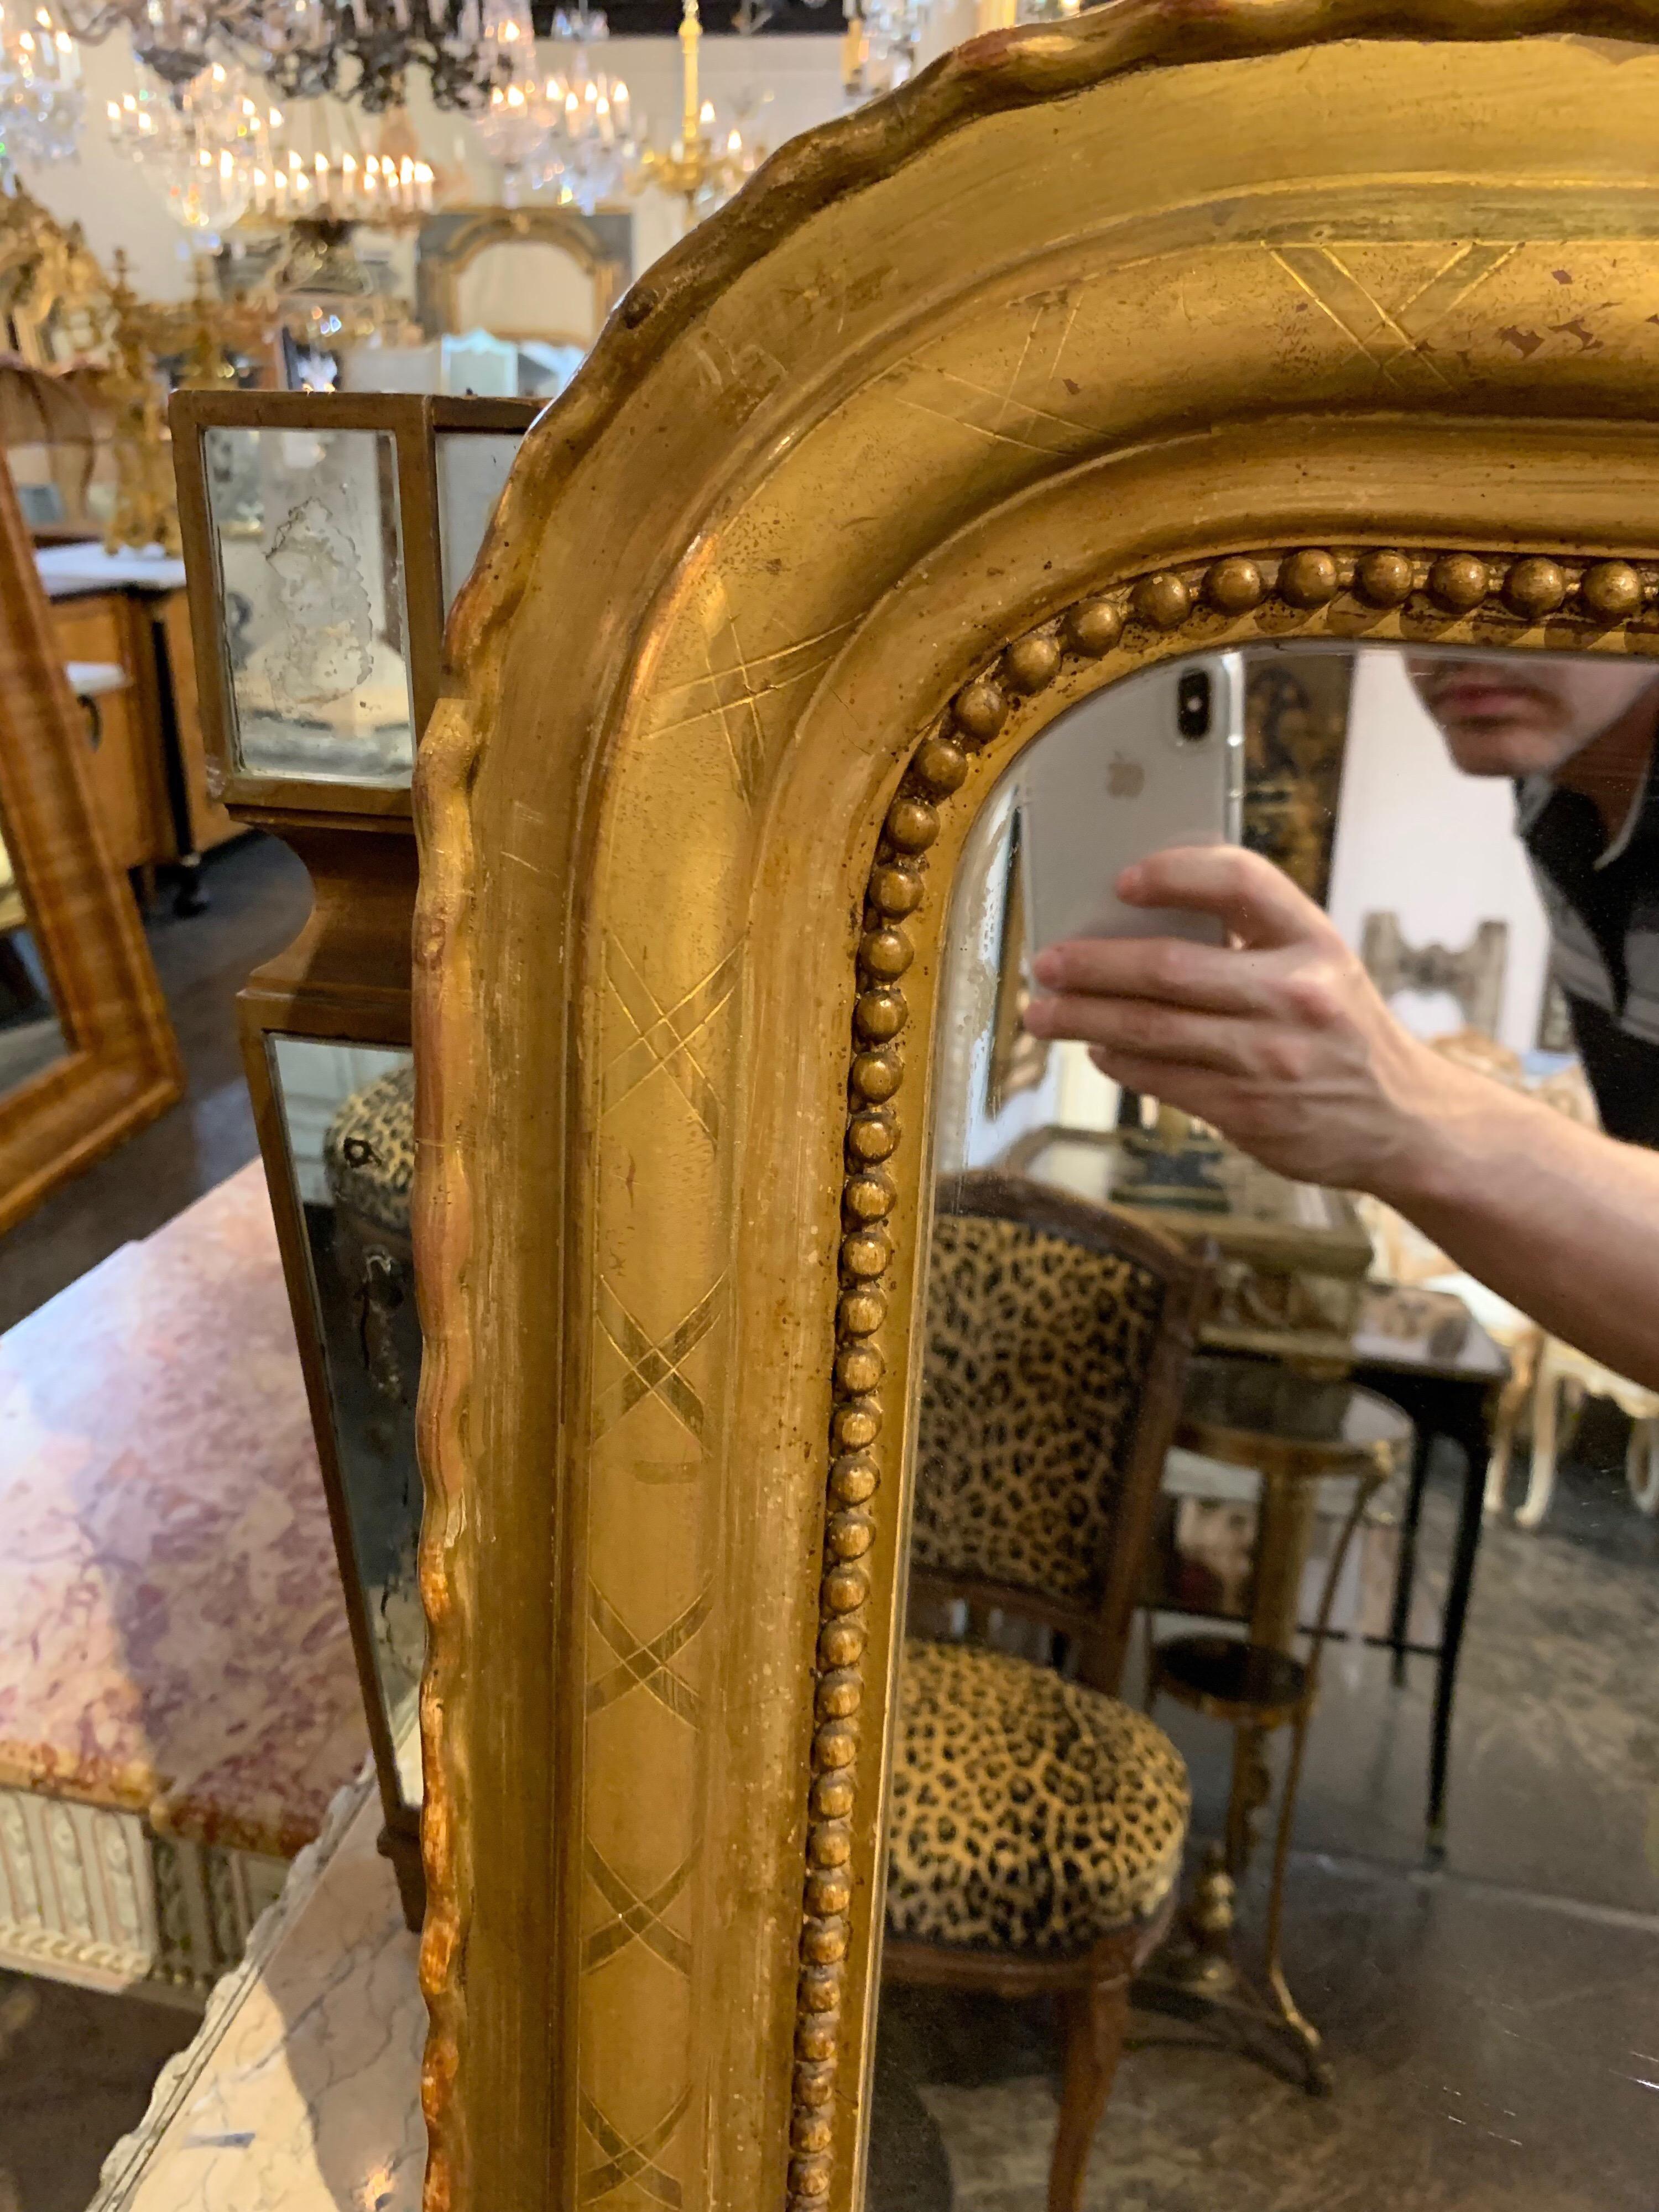 Very lovely 19th century French Louis Philippe gold gilt mirror. Has an X pattern and nice beaded detail and beautiful scalloped edge. Original wood on the back of the mirror. Makes an impressive statement in a fine home.